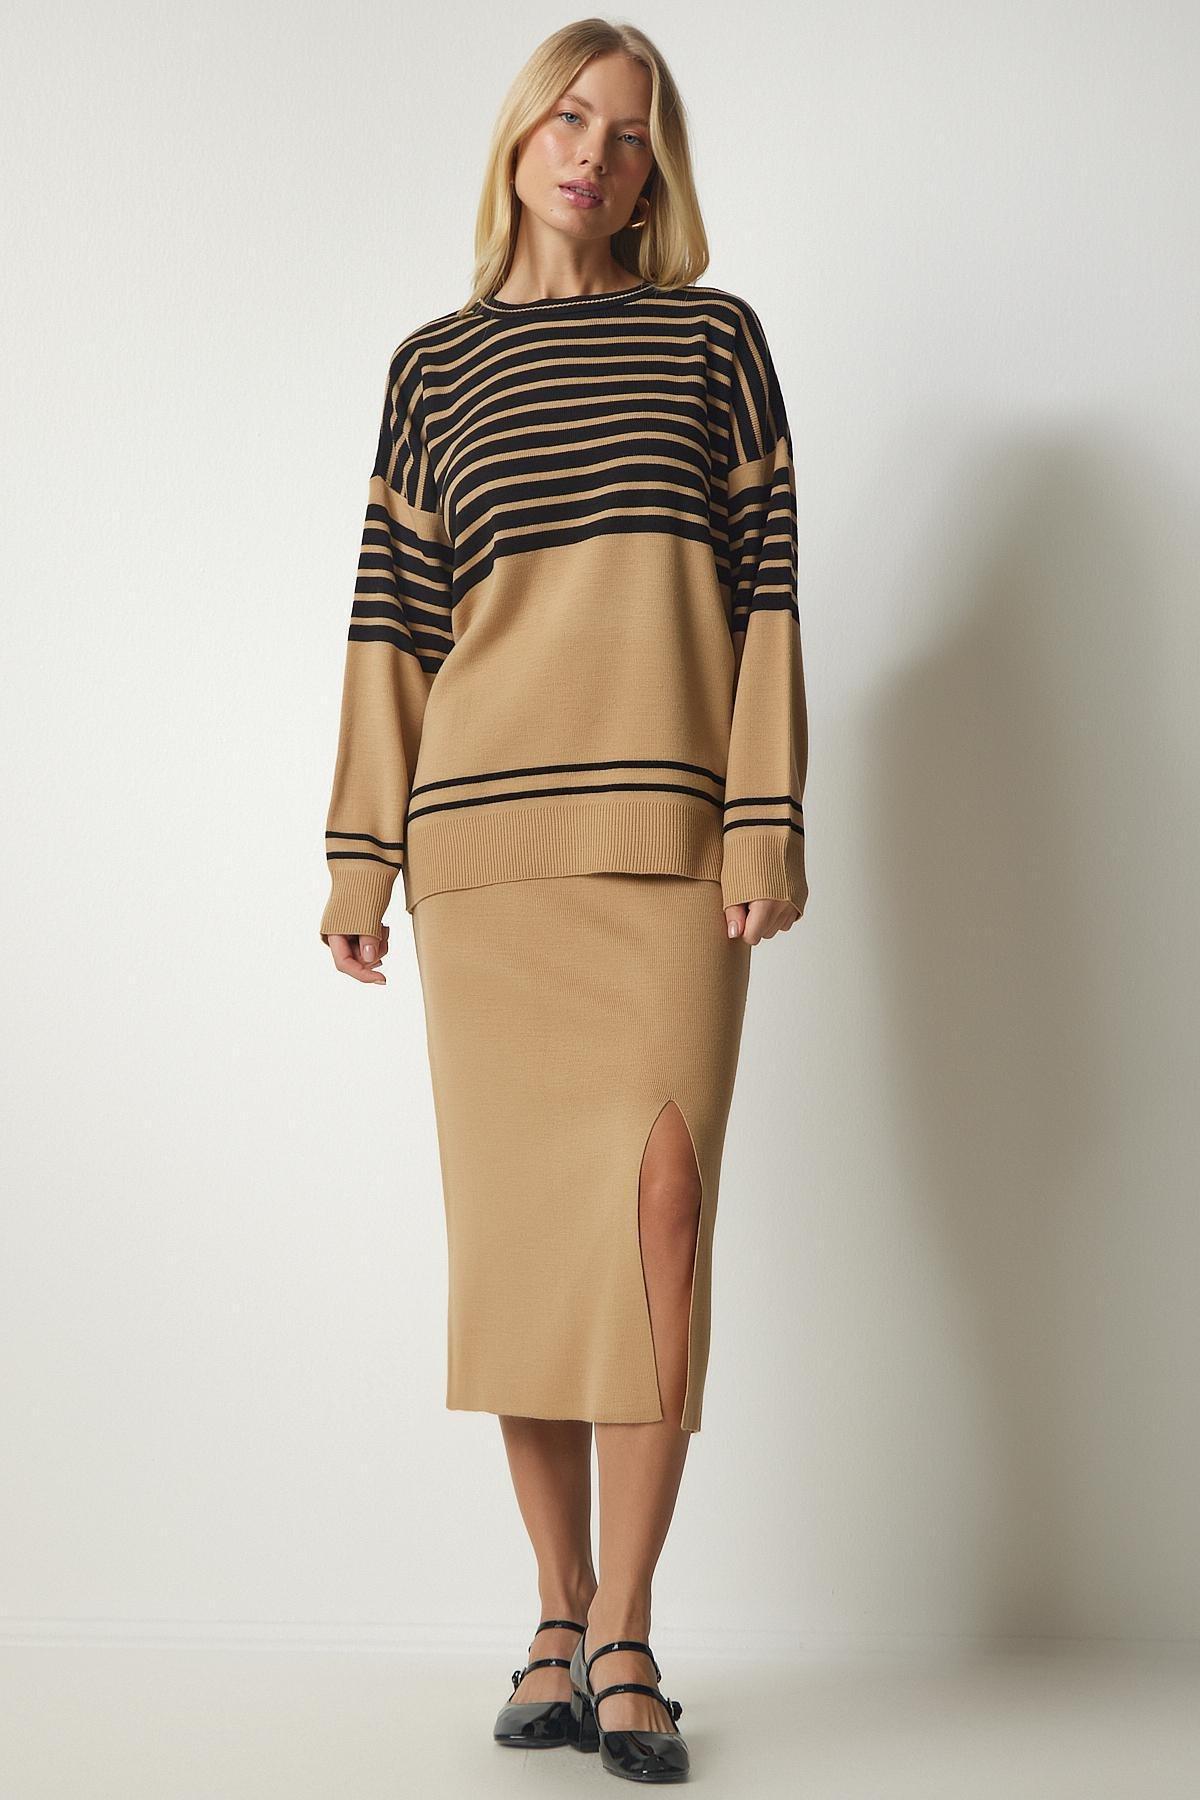 Happiness Istanbul - Beige Striped Sweater Skirt Knitwear Co-Ord Set